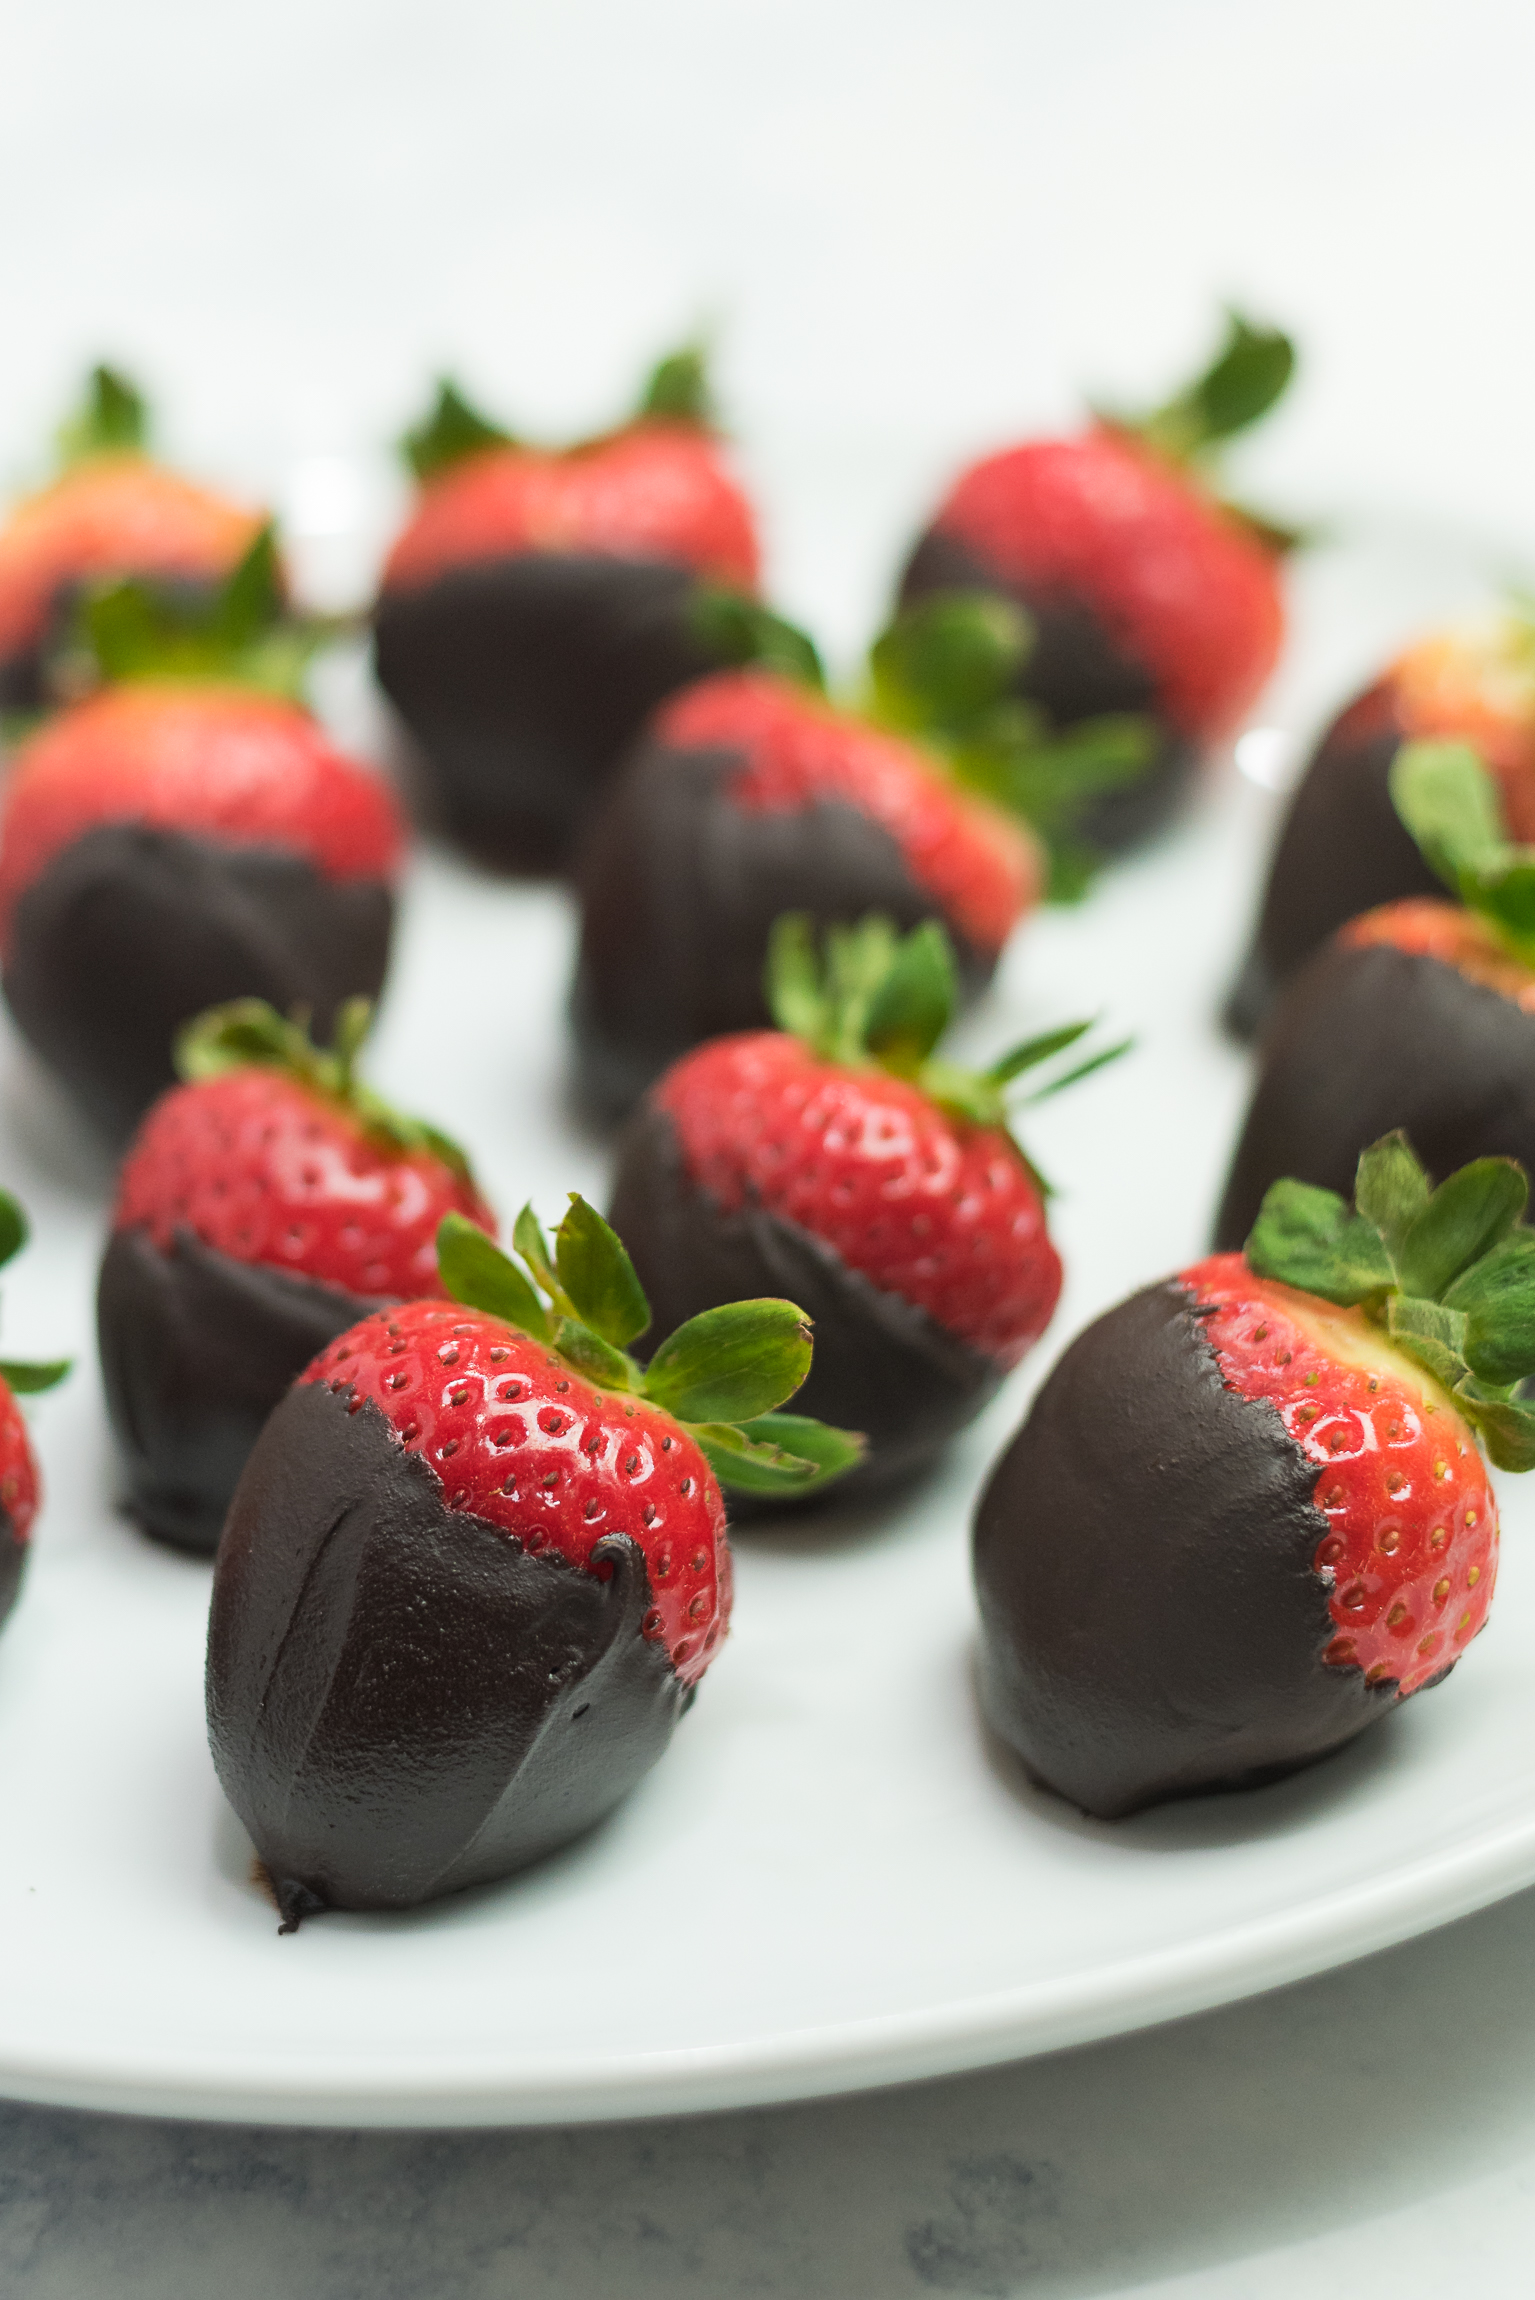 Chocolate Covered Strawberries - Laurie Bakke's Kitchen